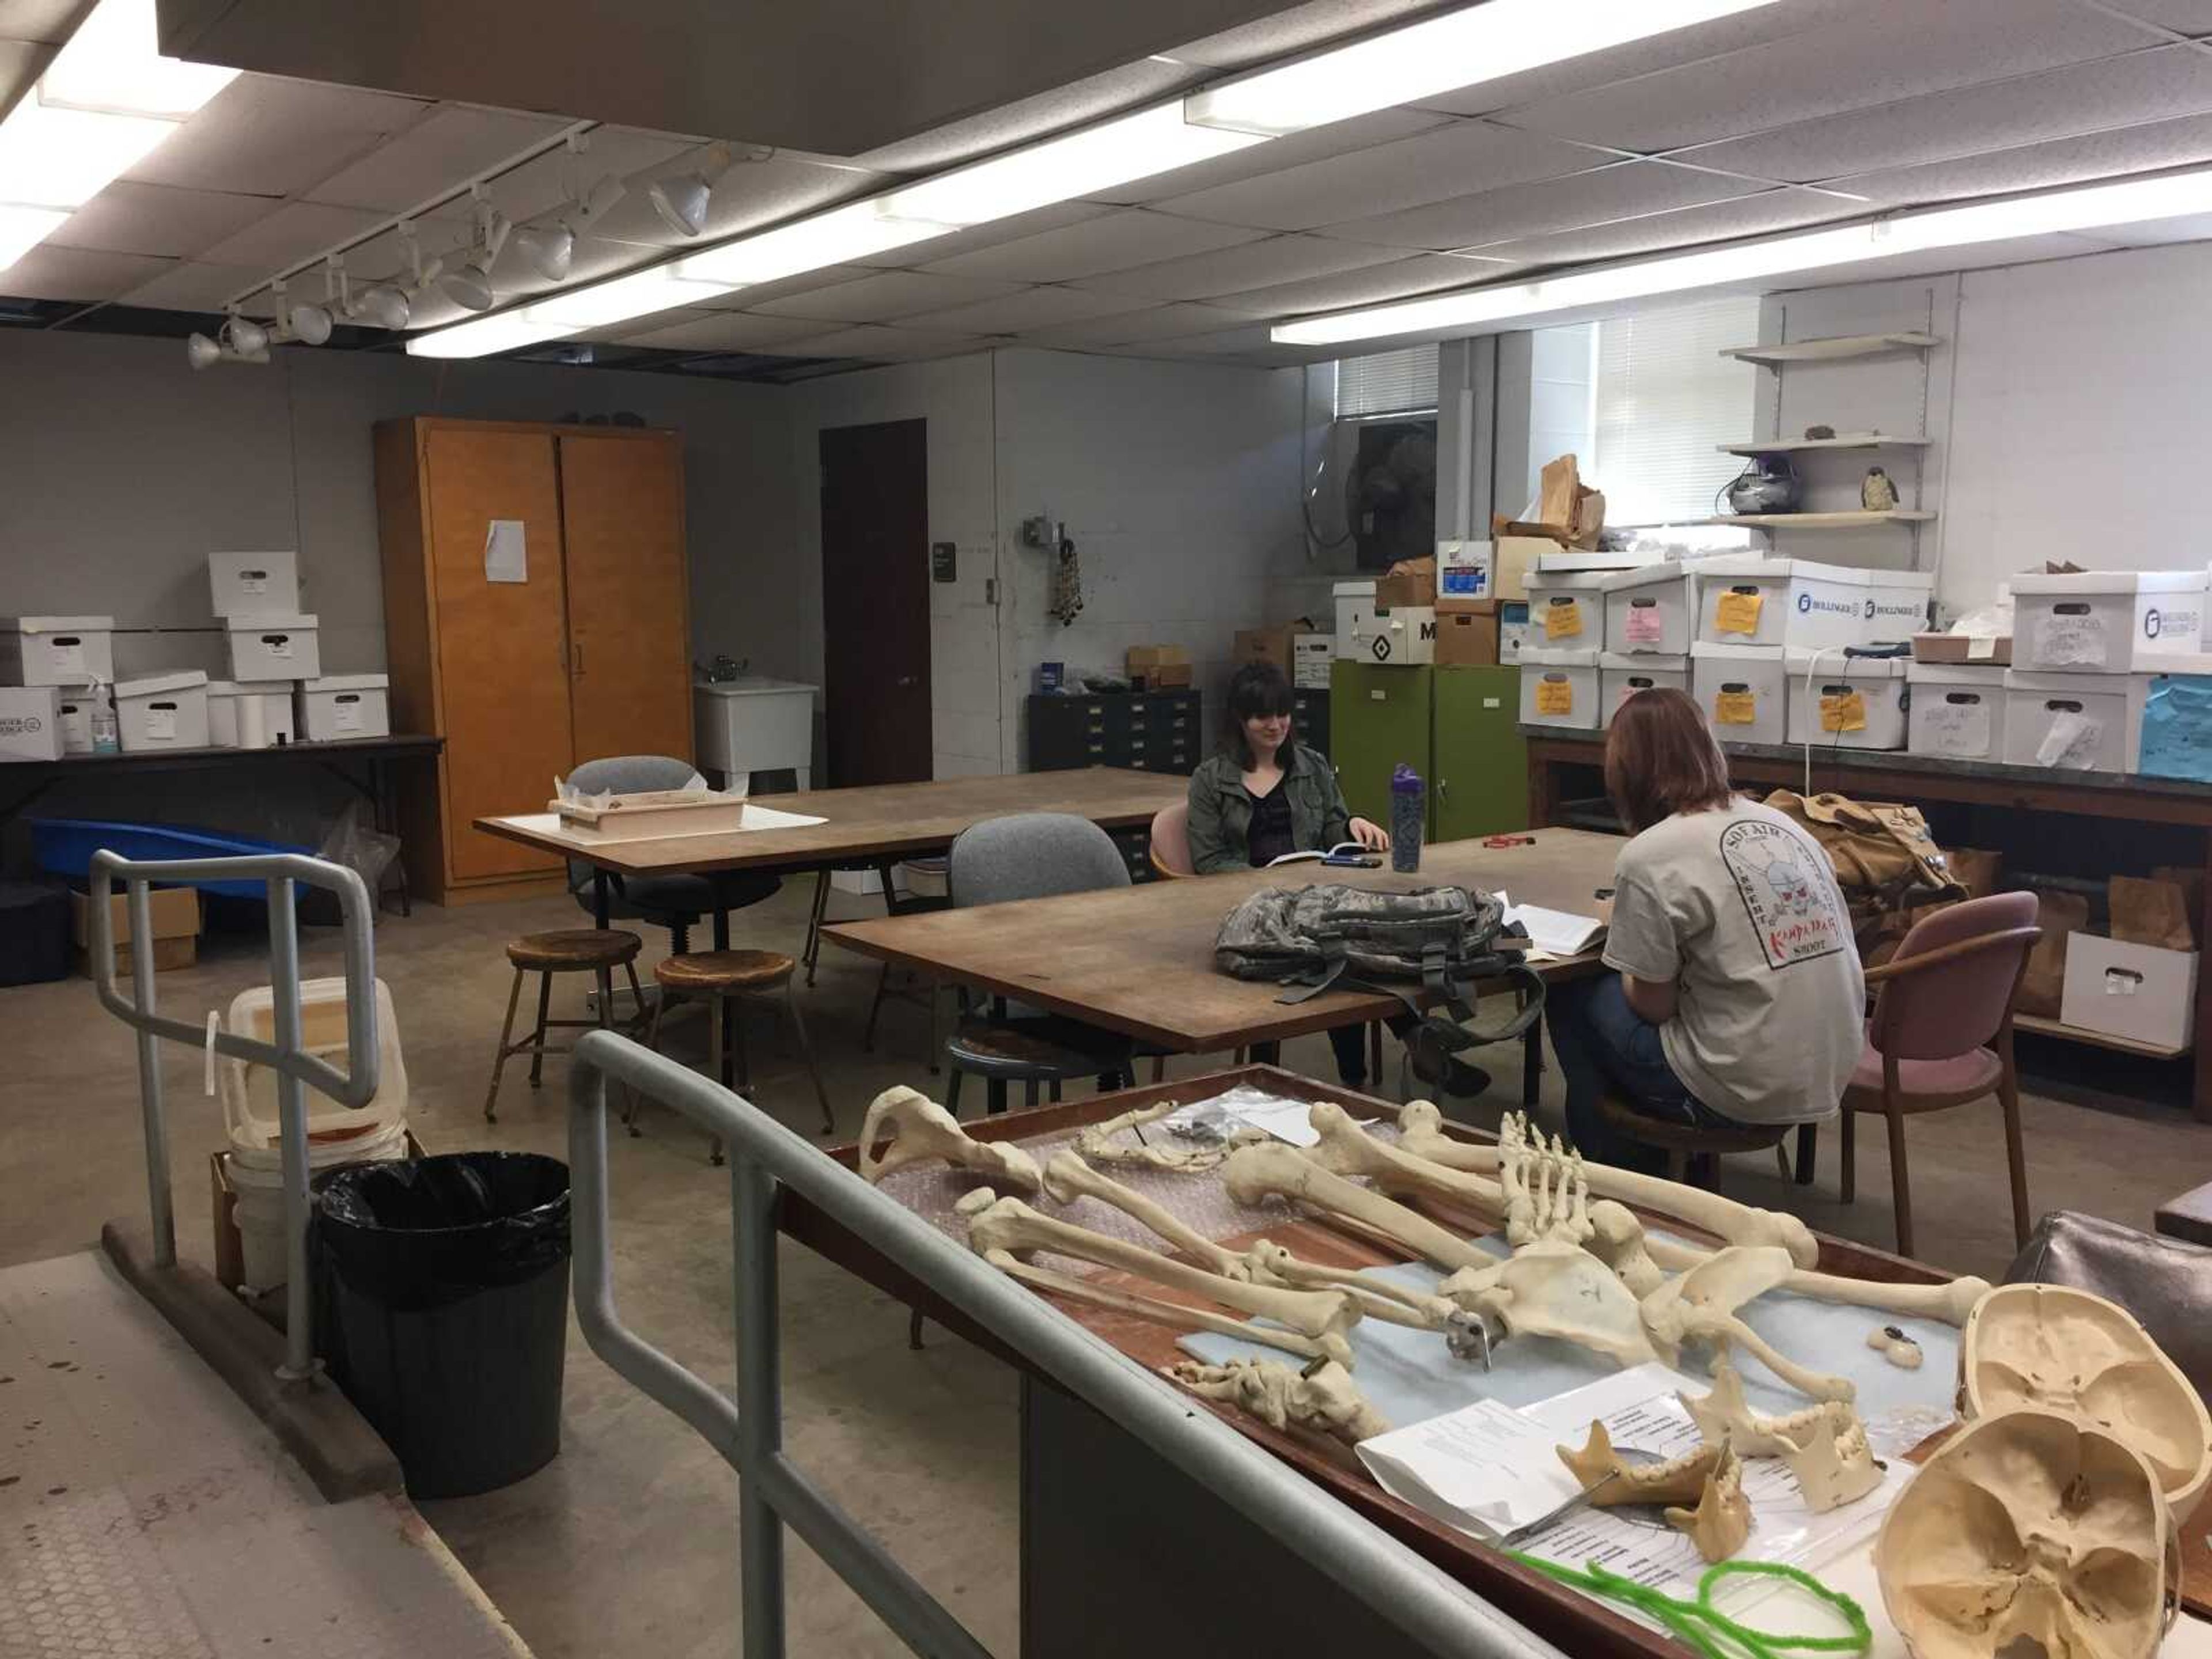 The archaeology lab has a temporary wall in the back of the photo restricting access to the effected parts of the building.